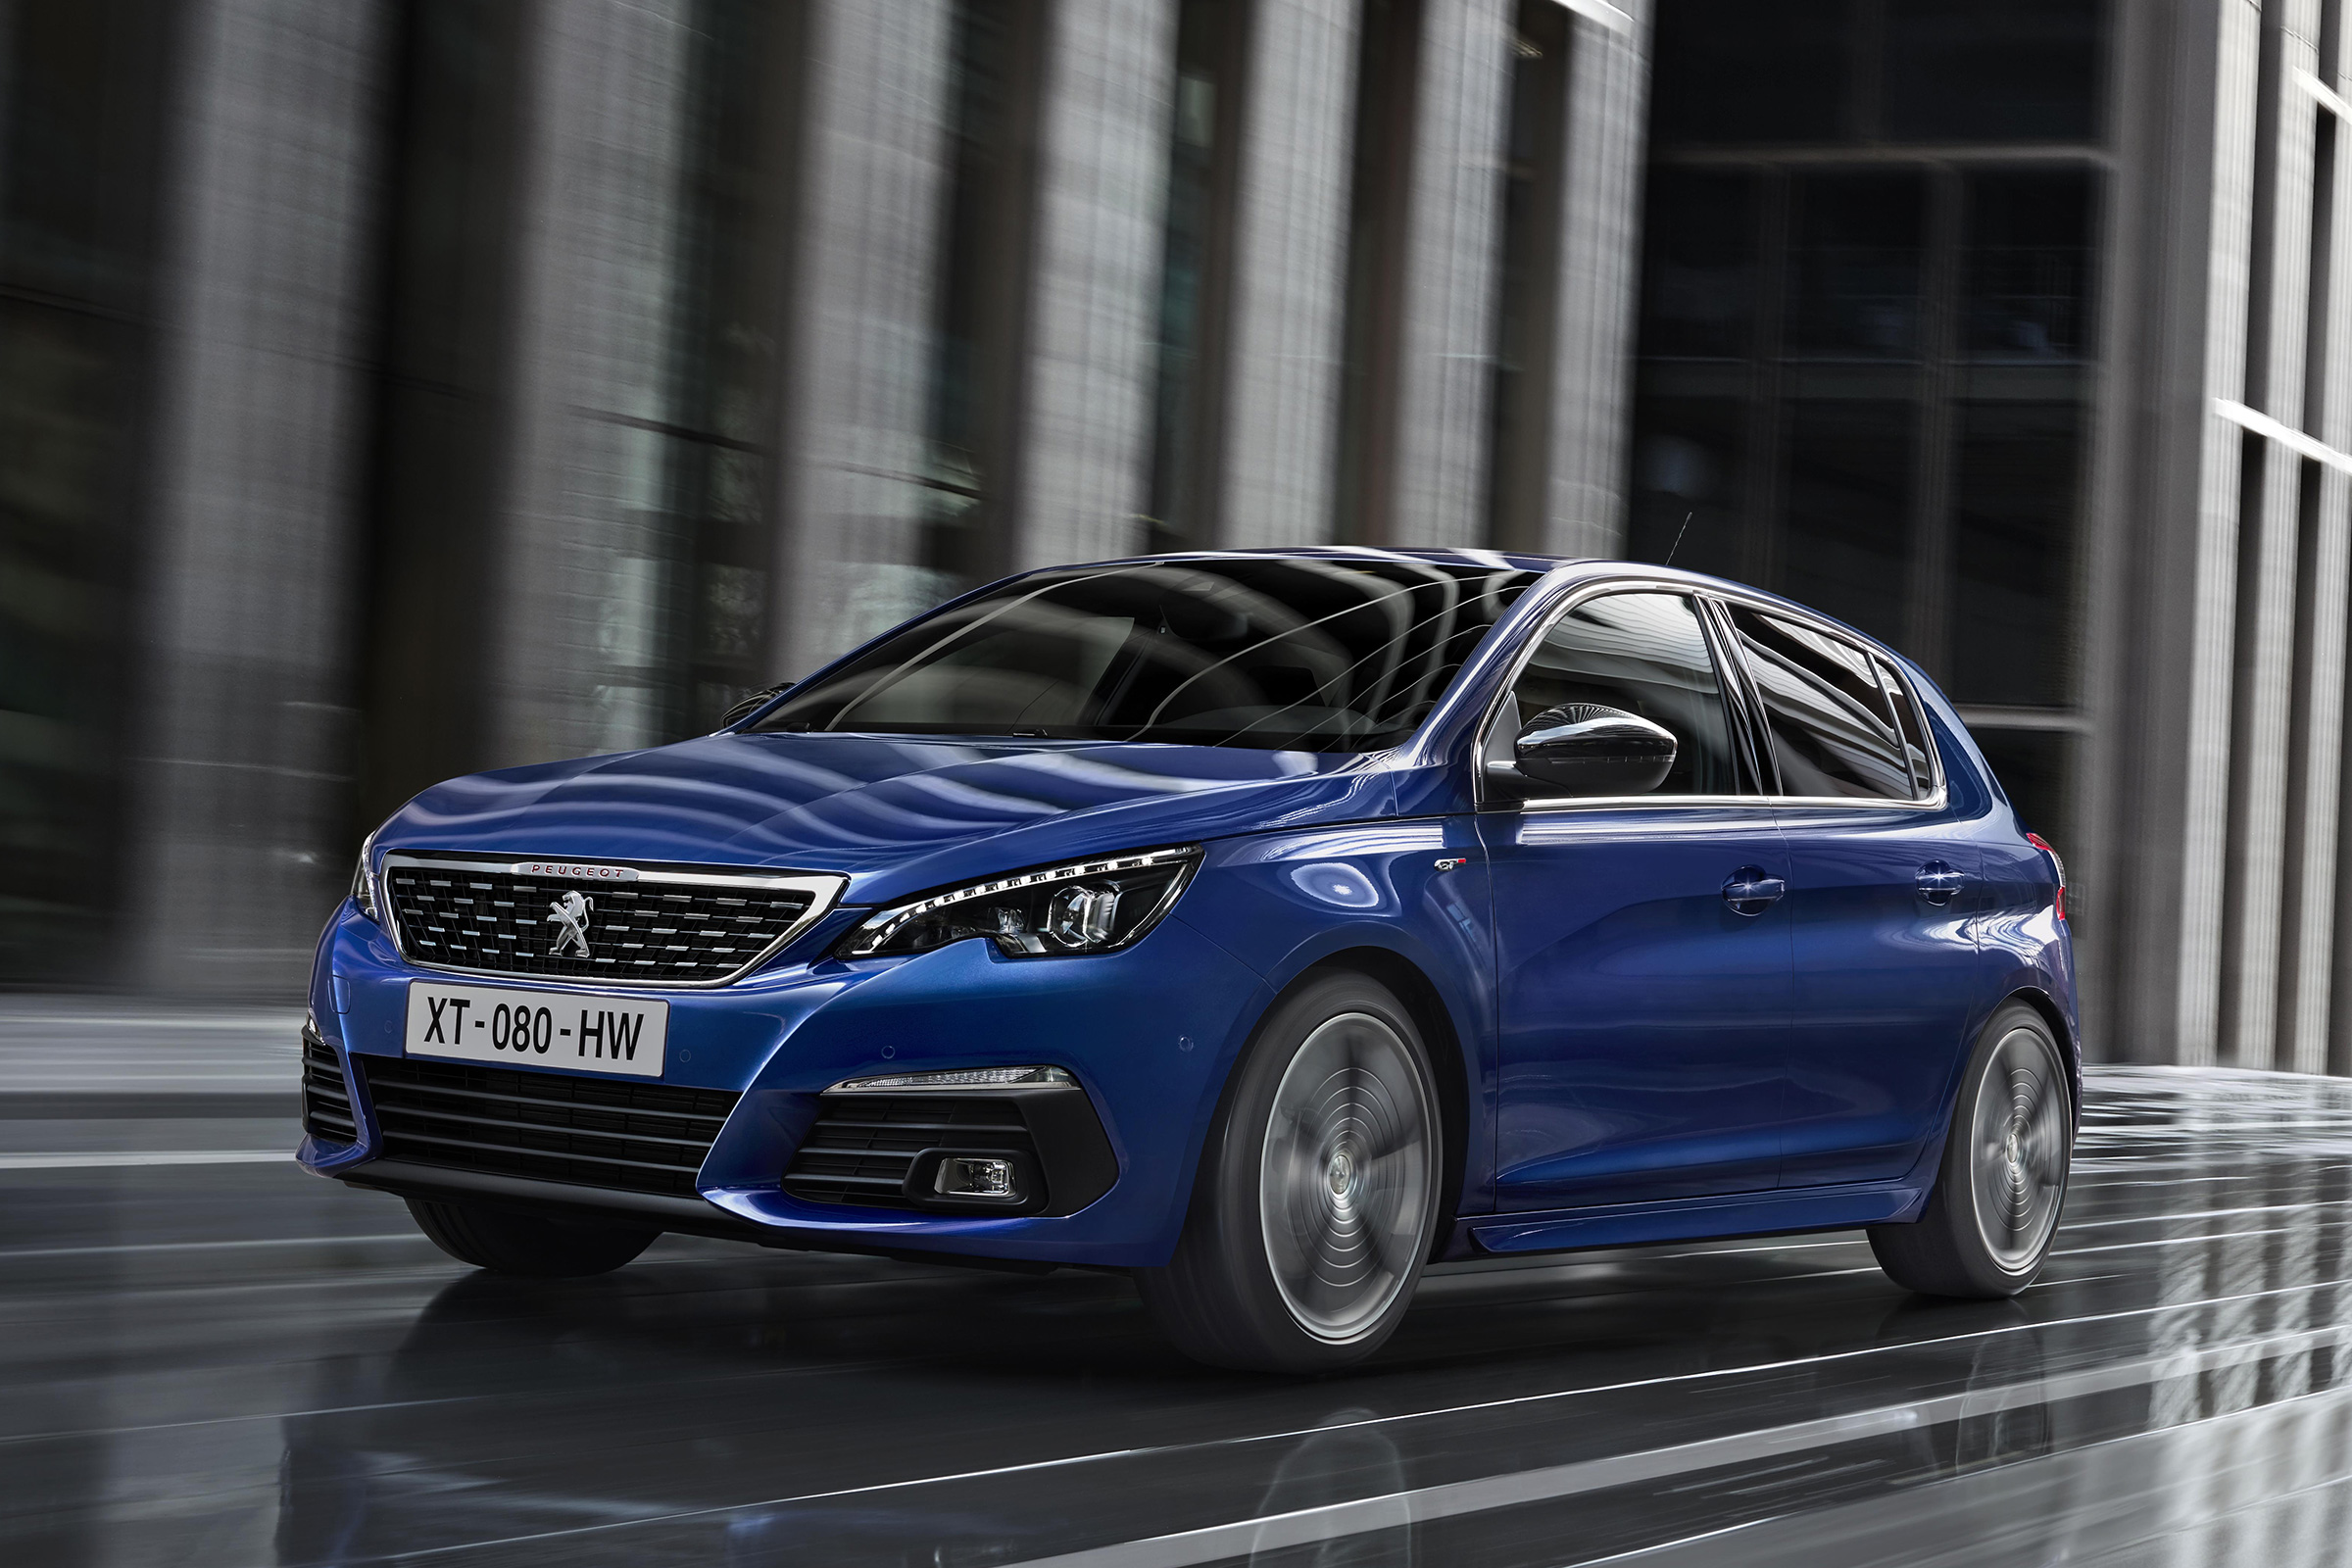 Peugeot 308 updated for 2017 with fresh look and engines